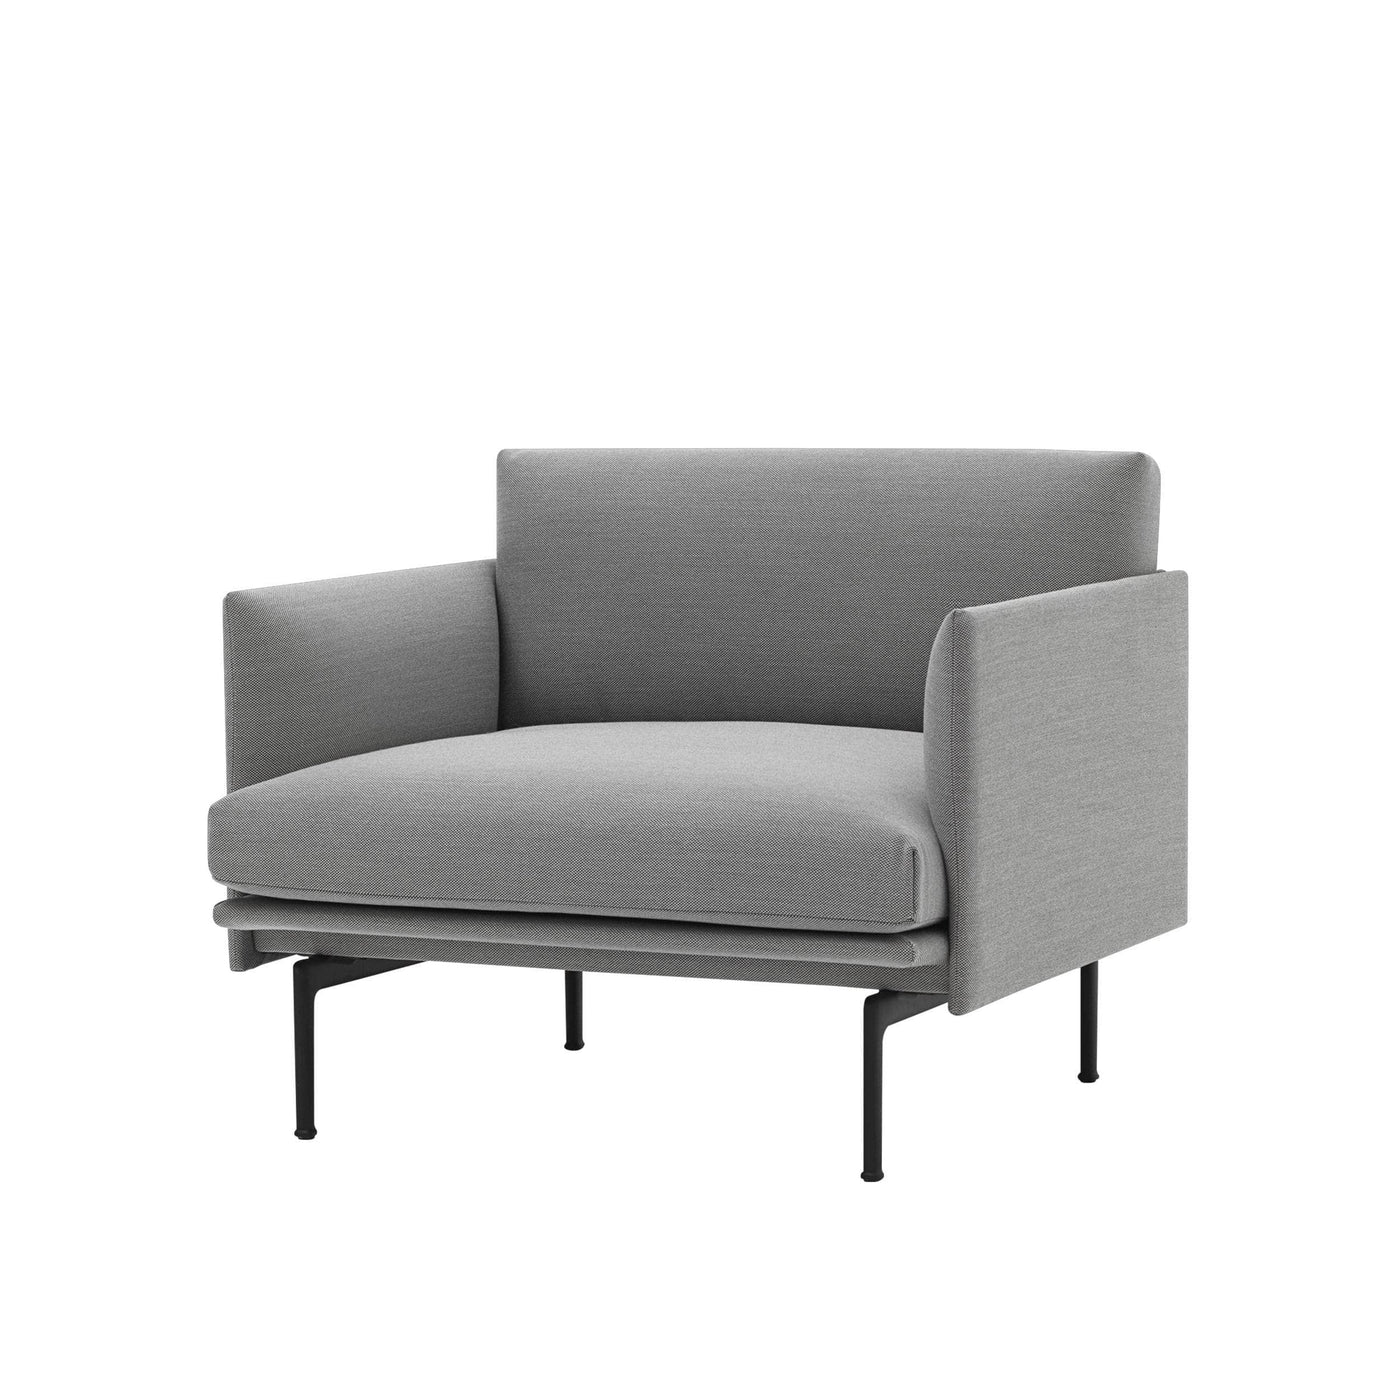 Steelcut Trio 133 by Kvadrat. Grey fabric for Muuto Rest, Connect & Outline sofas. Order your free fabric swatches at someday designs. 